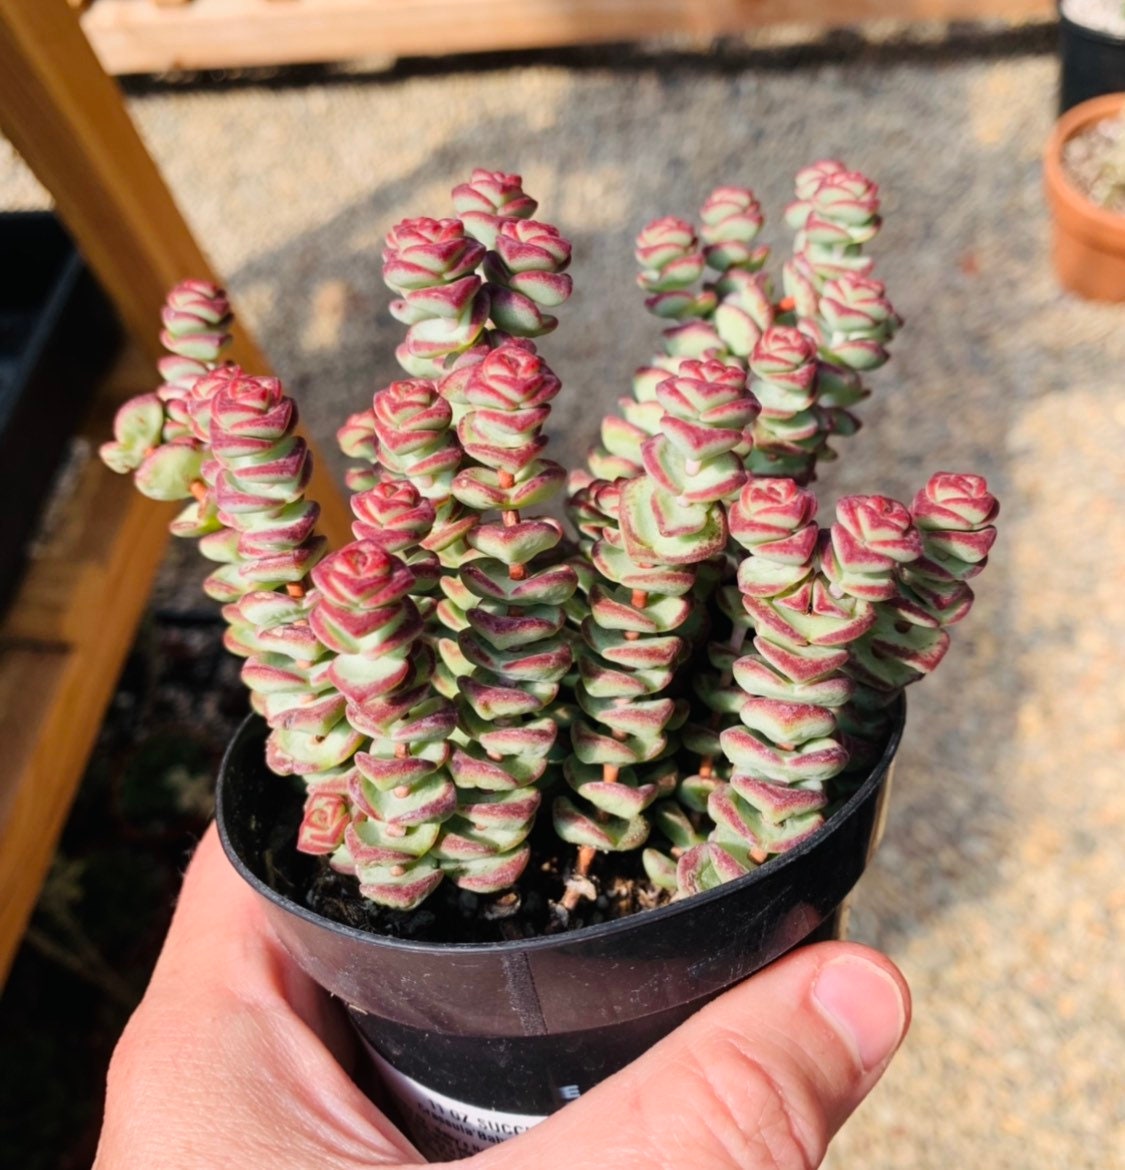 I have this Crassula Baby's Necklace. I don't know what's going on with the  lower stems/leaves; the stems are becoming woody and the leaves are  shriveling up. Any help would be appreciated! :